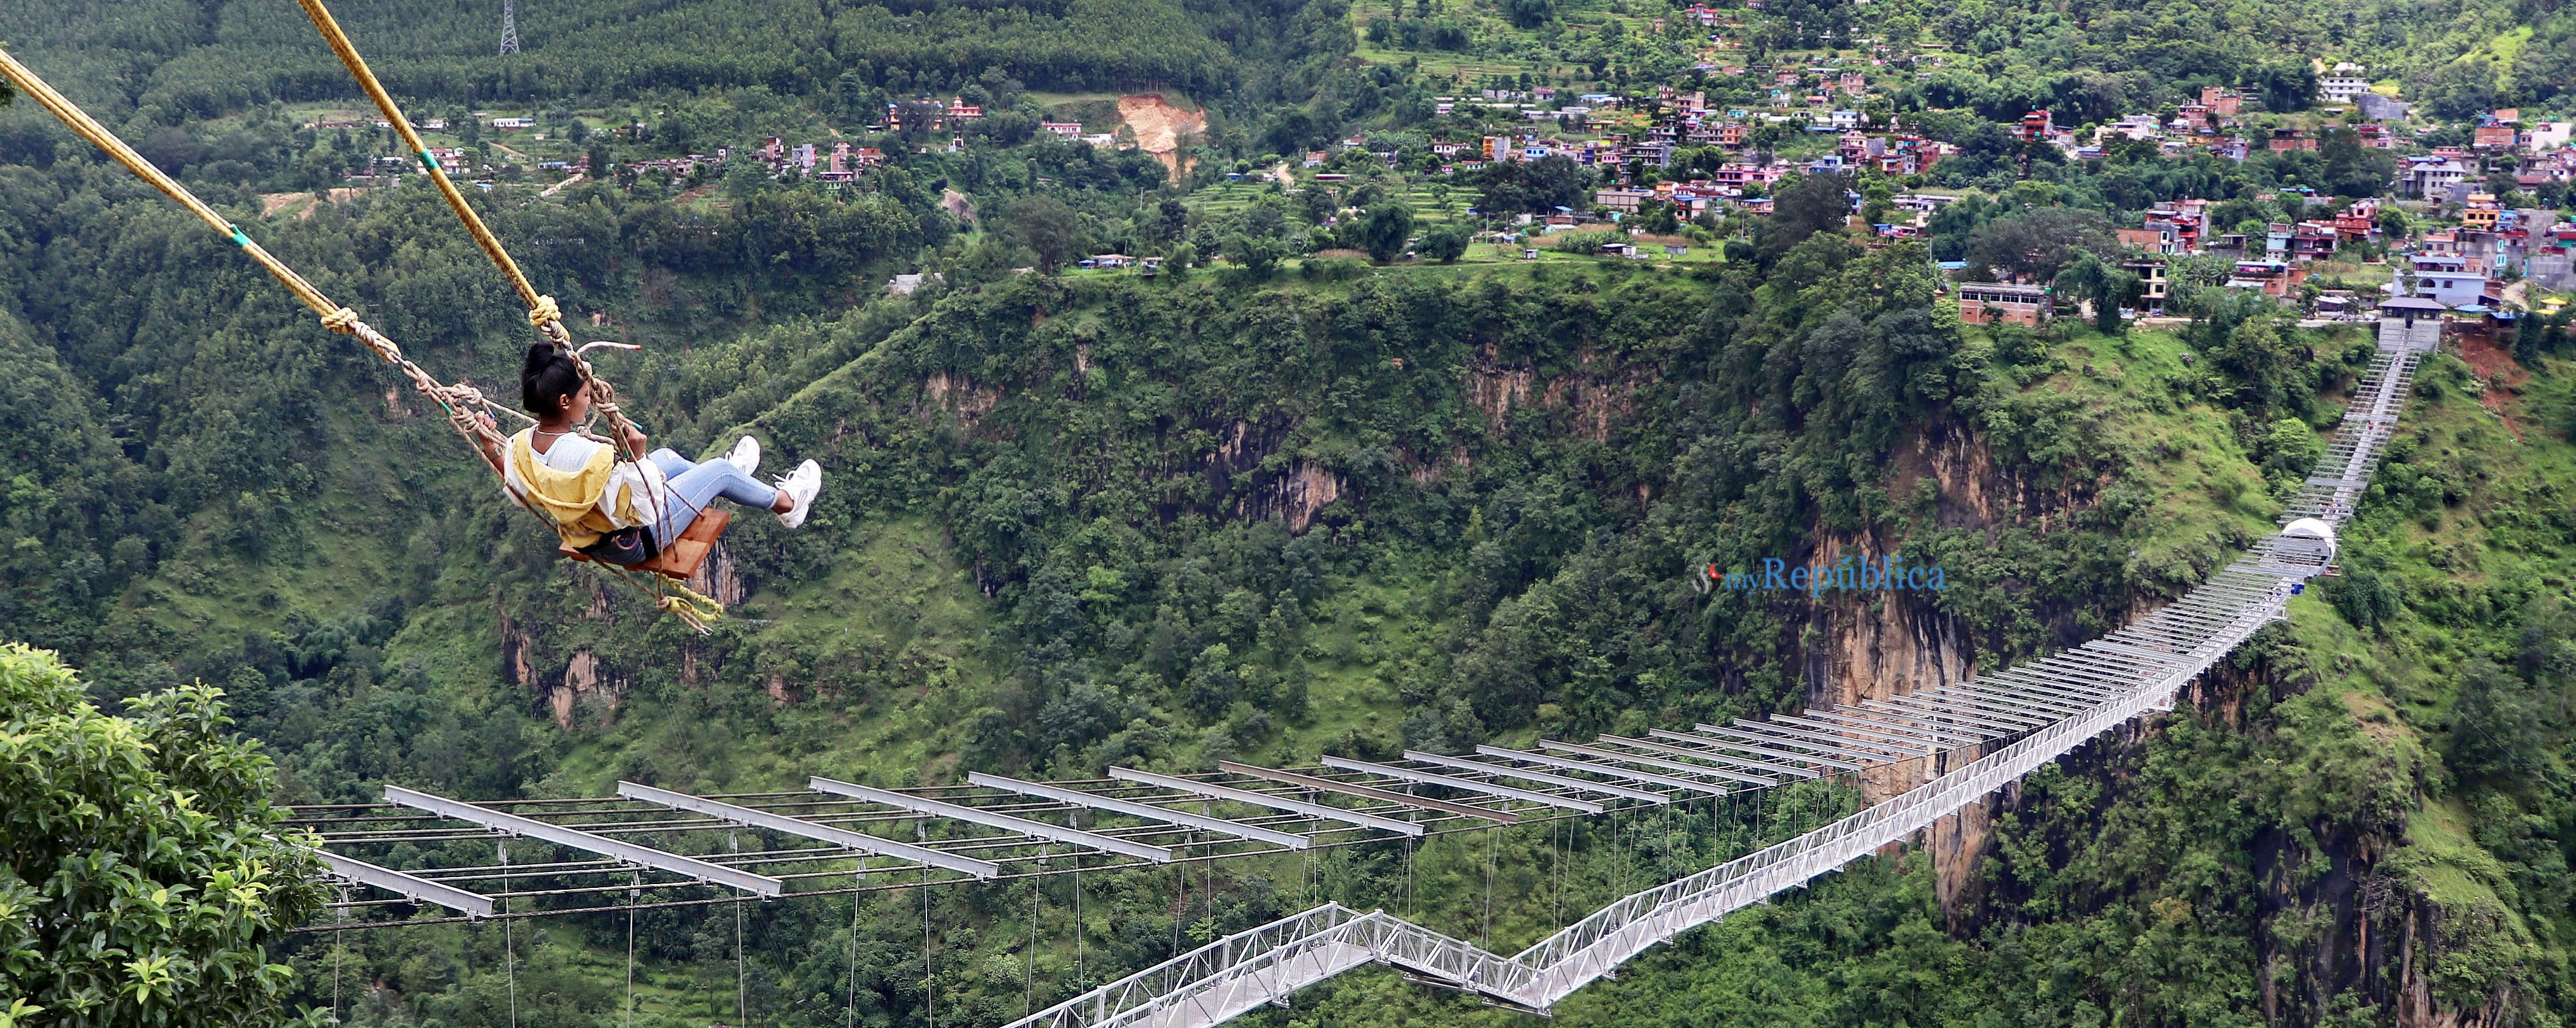 World's highest bungee and swing from bridge come into operation